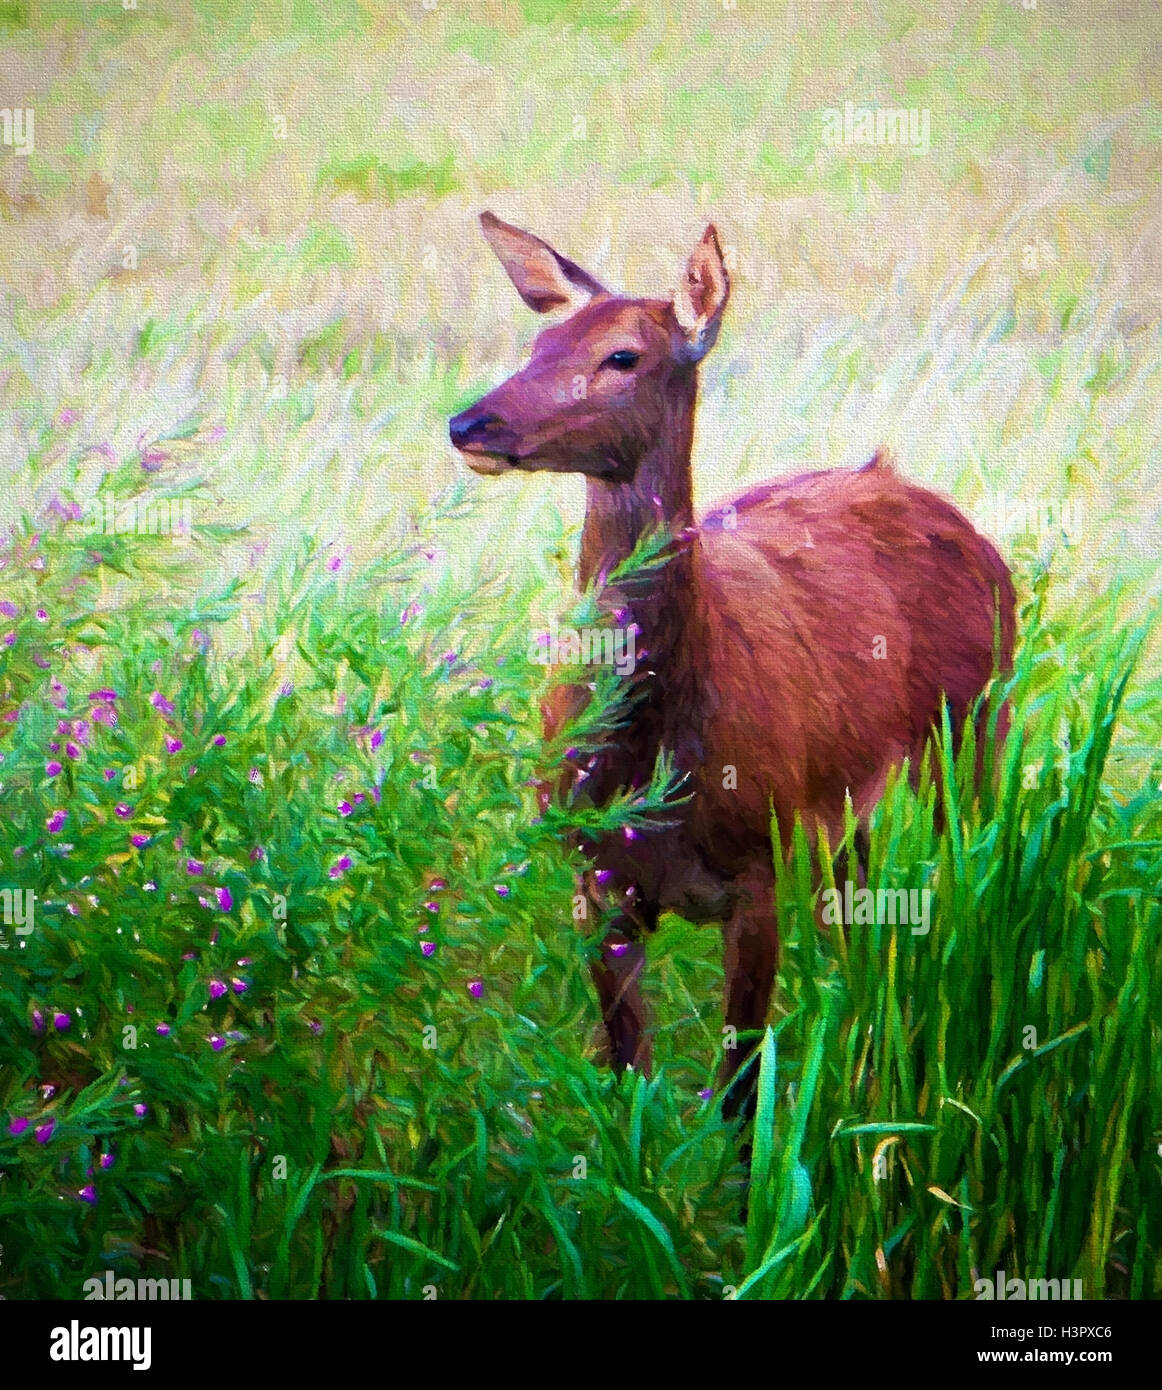 Red deer in countryside standing by reeds and colourful flowers illustration like oil painting Stock Photo